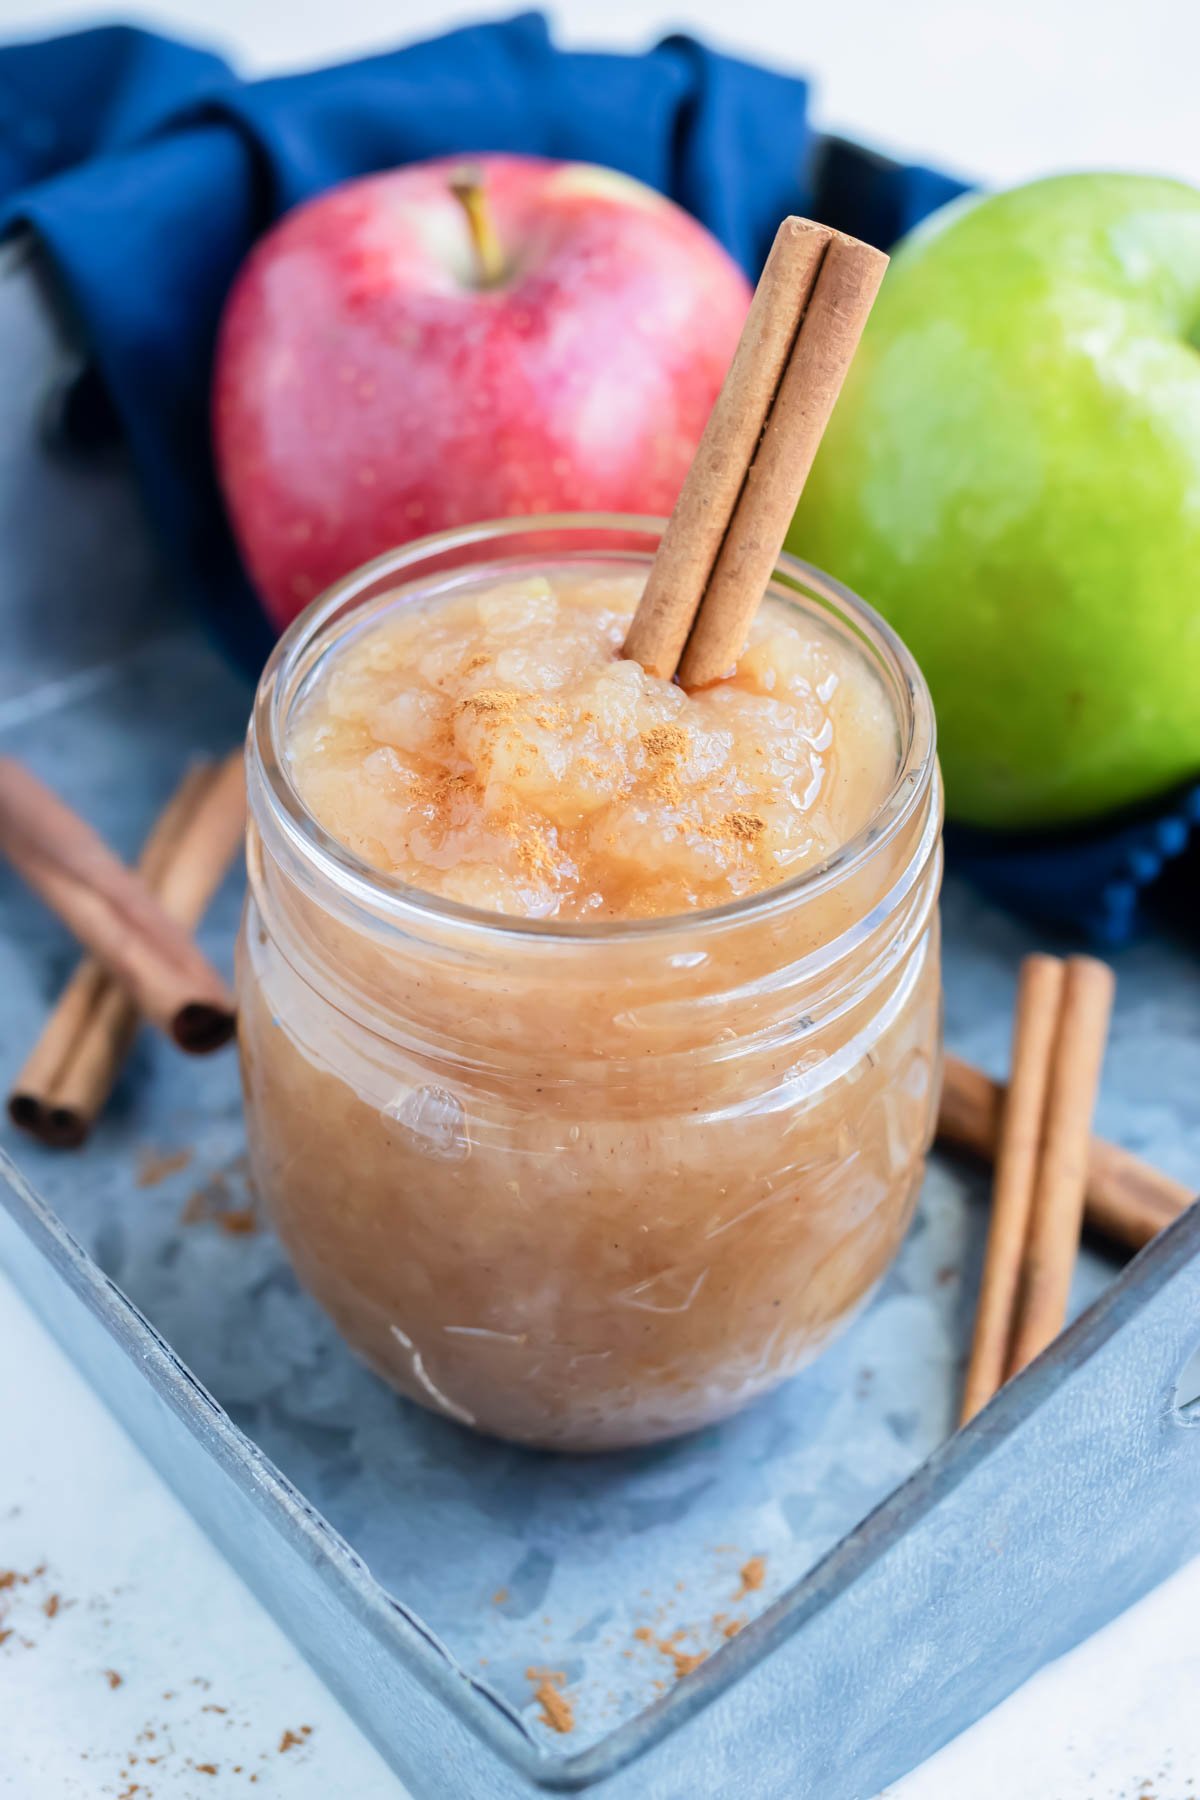 This instant pot applesauce recipe is quick and easy to make.